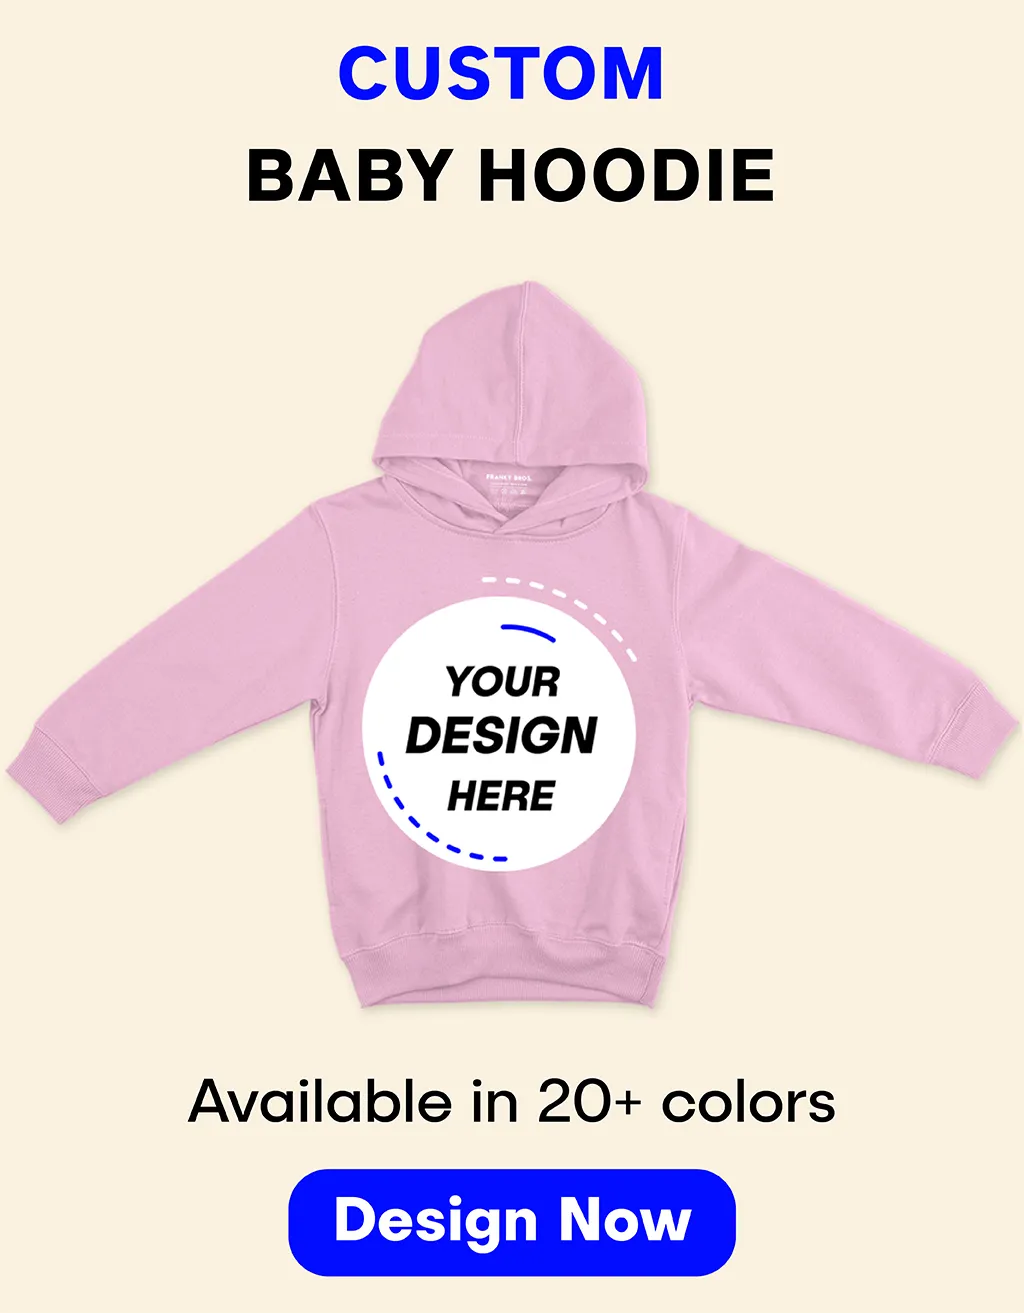 custom baby hoodie online customised new born baby dress for boys and girls printing near me newborn baby clothes for photoshoot online india